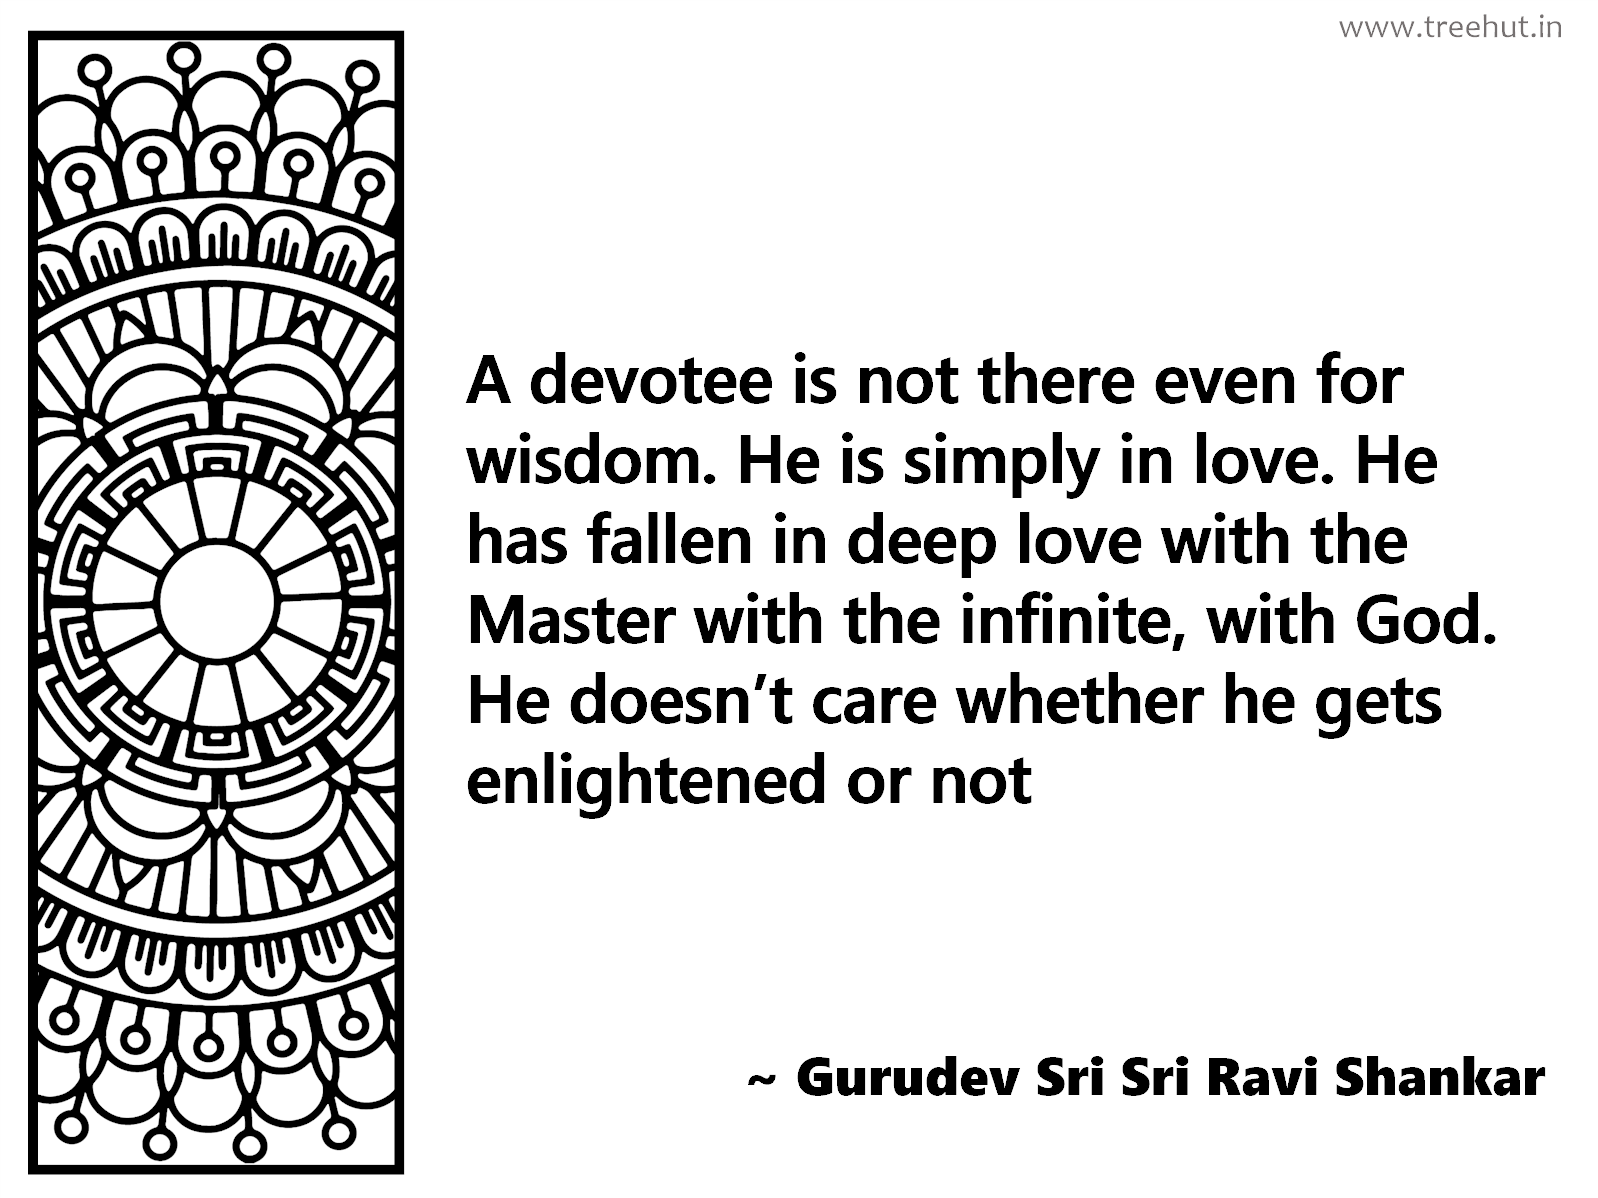 A devotee is not there even for wisdom. He is simply in love. He has fallen in deep love with the Master with the infinite, with God. He doesn’t care whether he gets enlightened or not Inspirational Quote by Gurudev Sri Sri Ravi Shankar, coloring pages